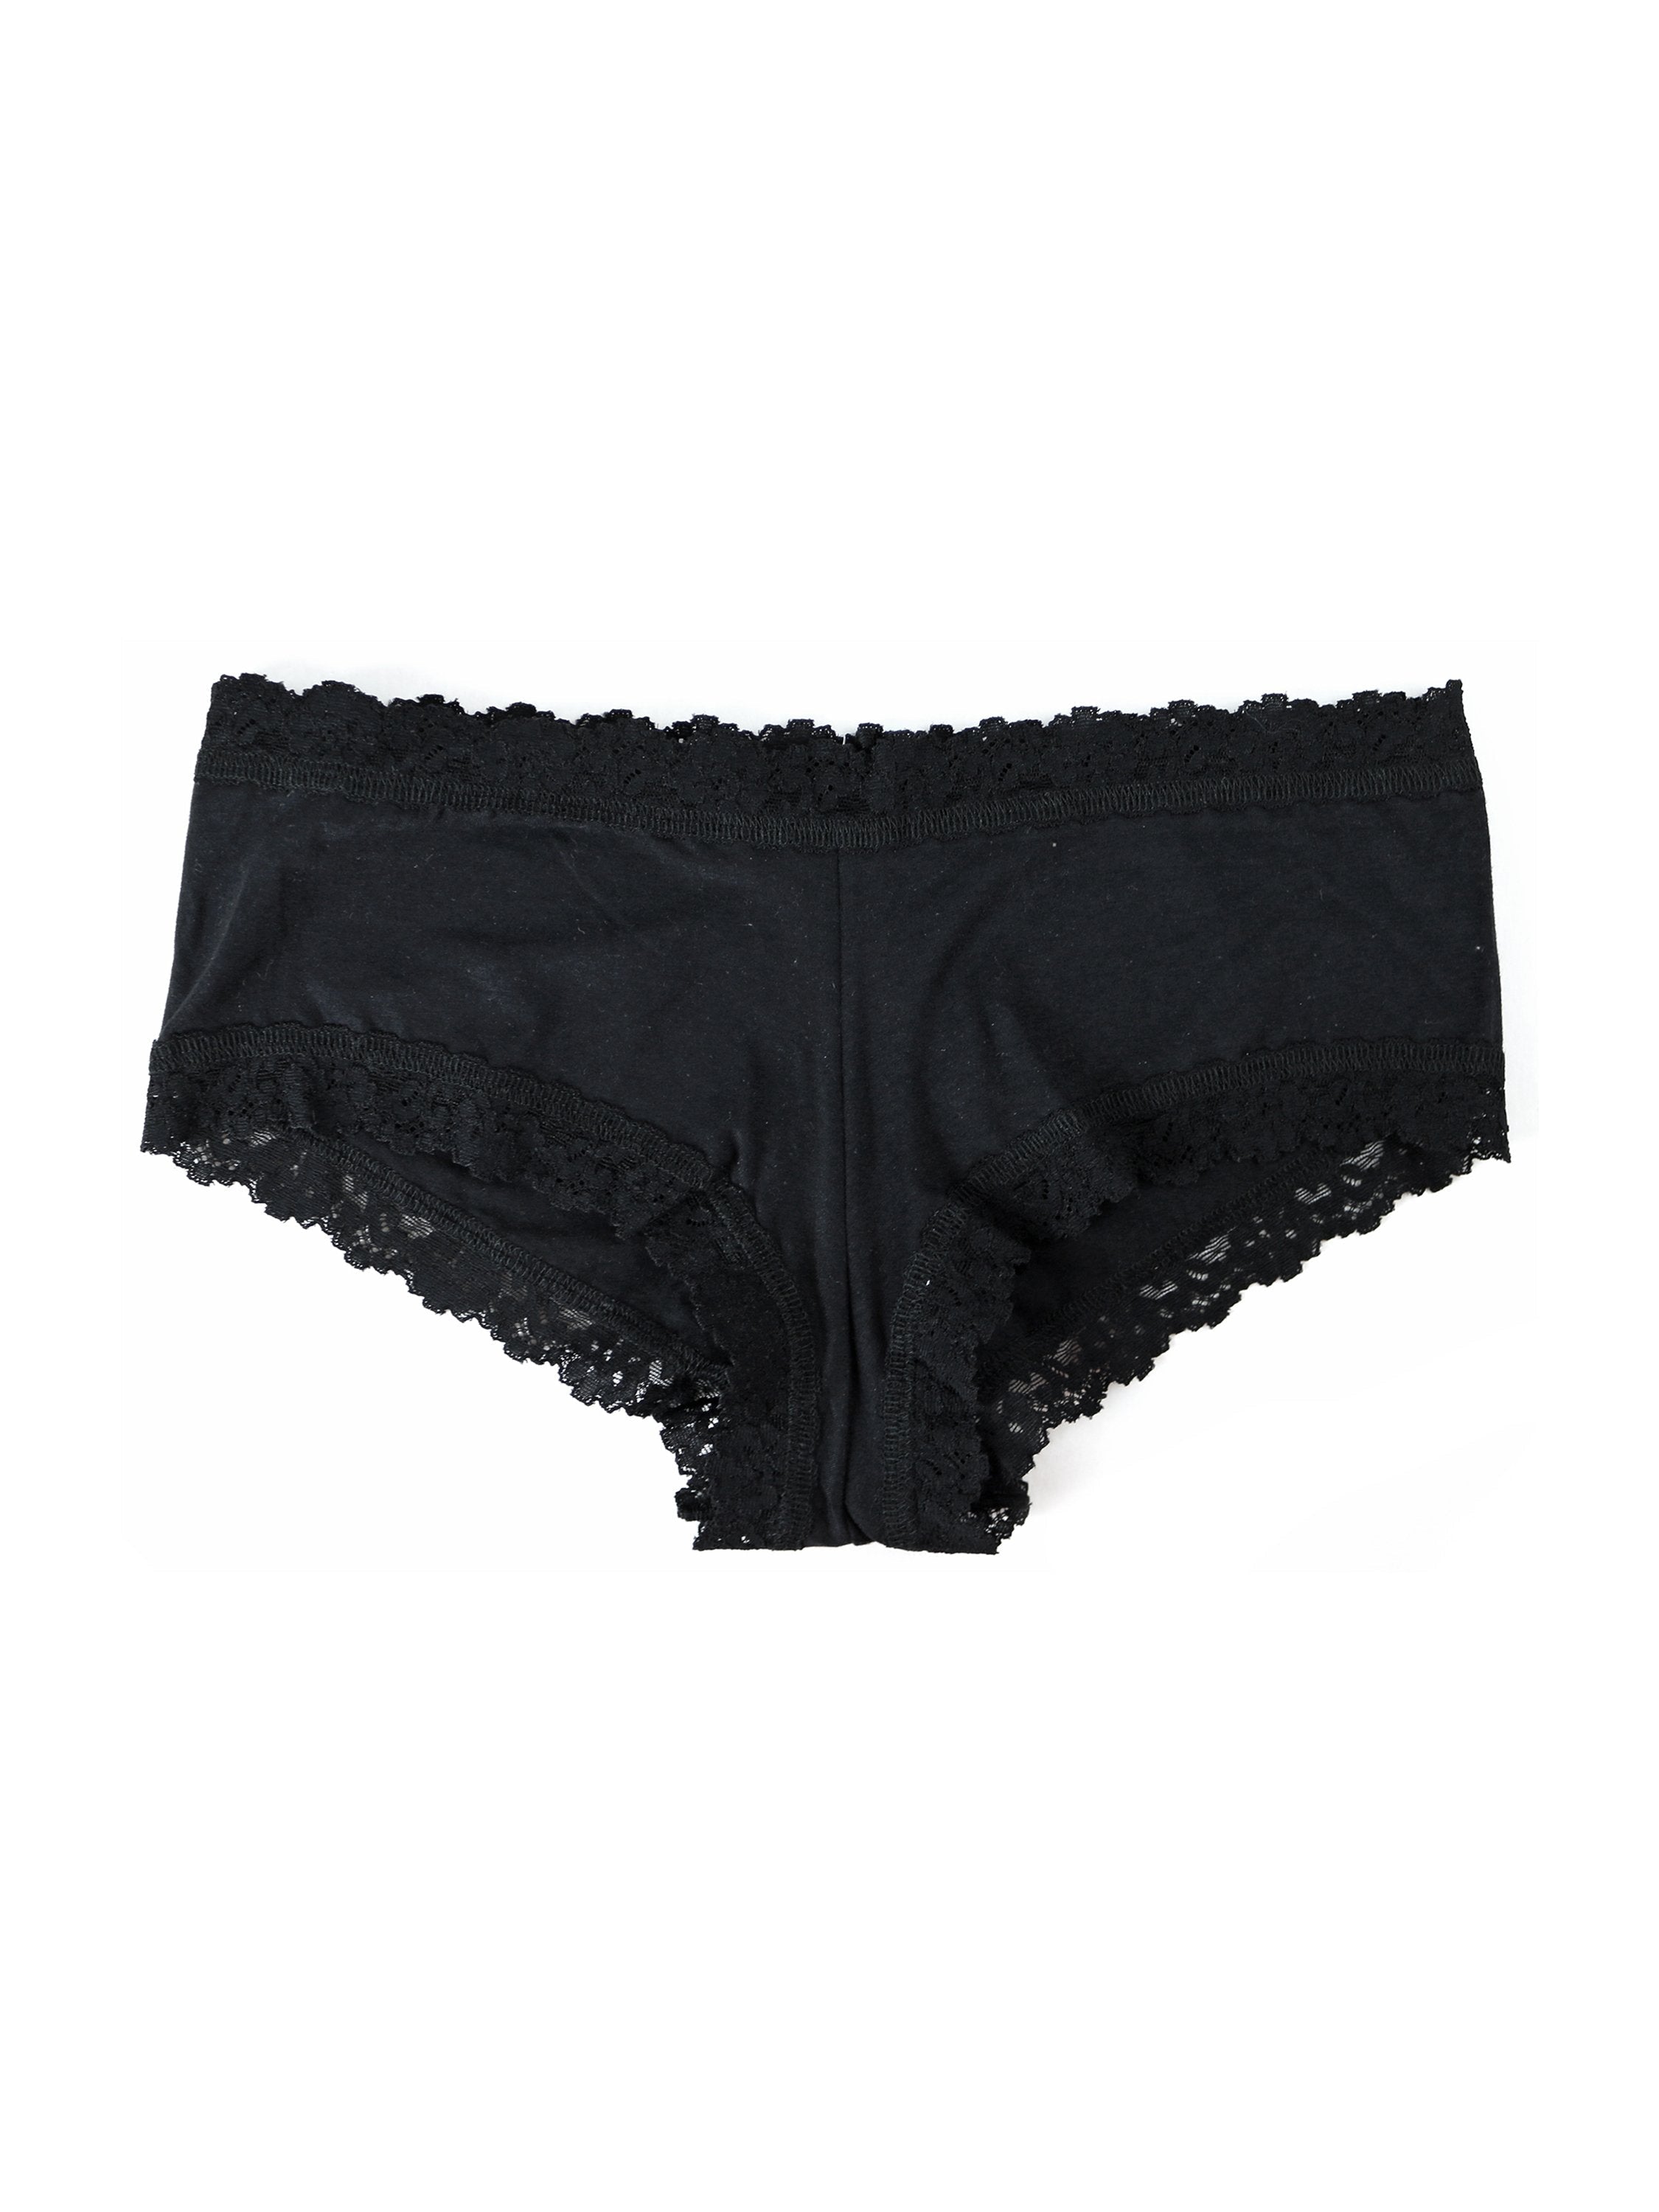 Cotton Essentials Cheeky Panty in Black